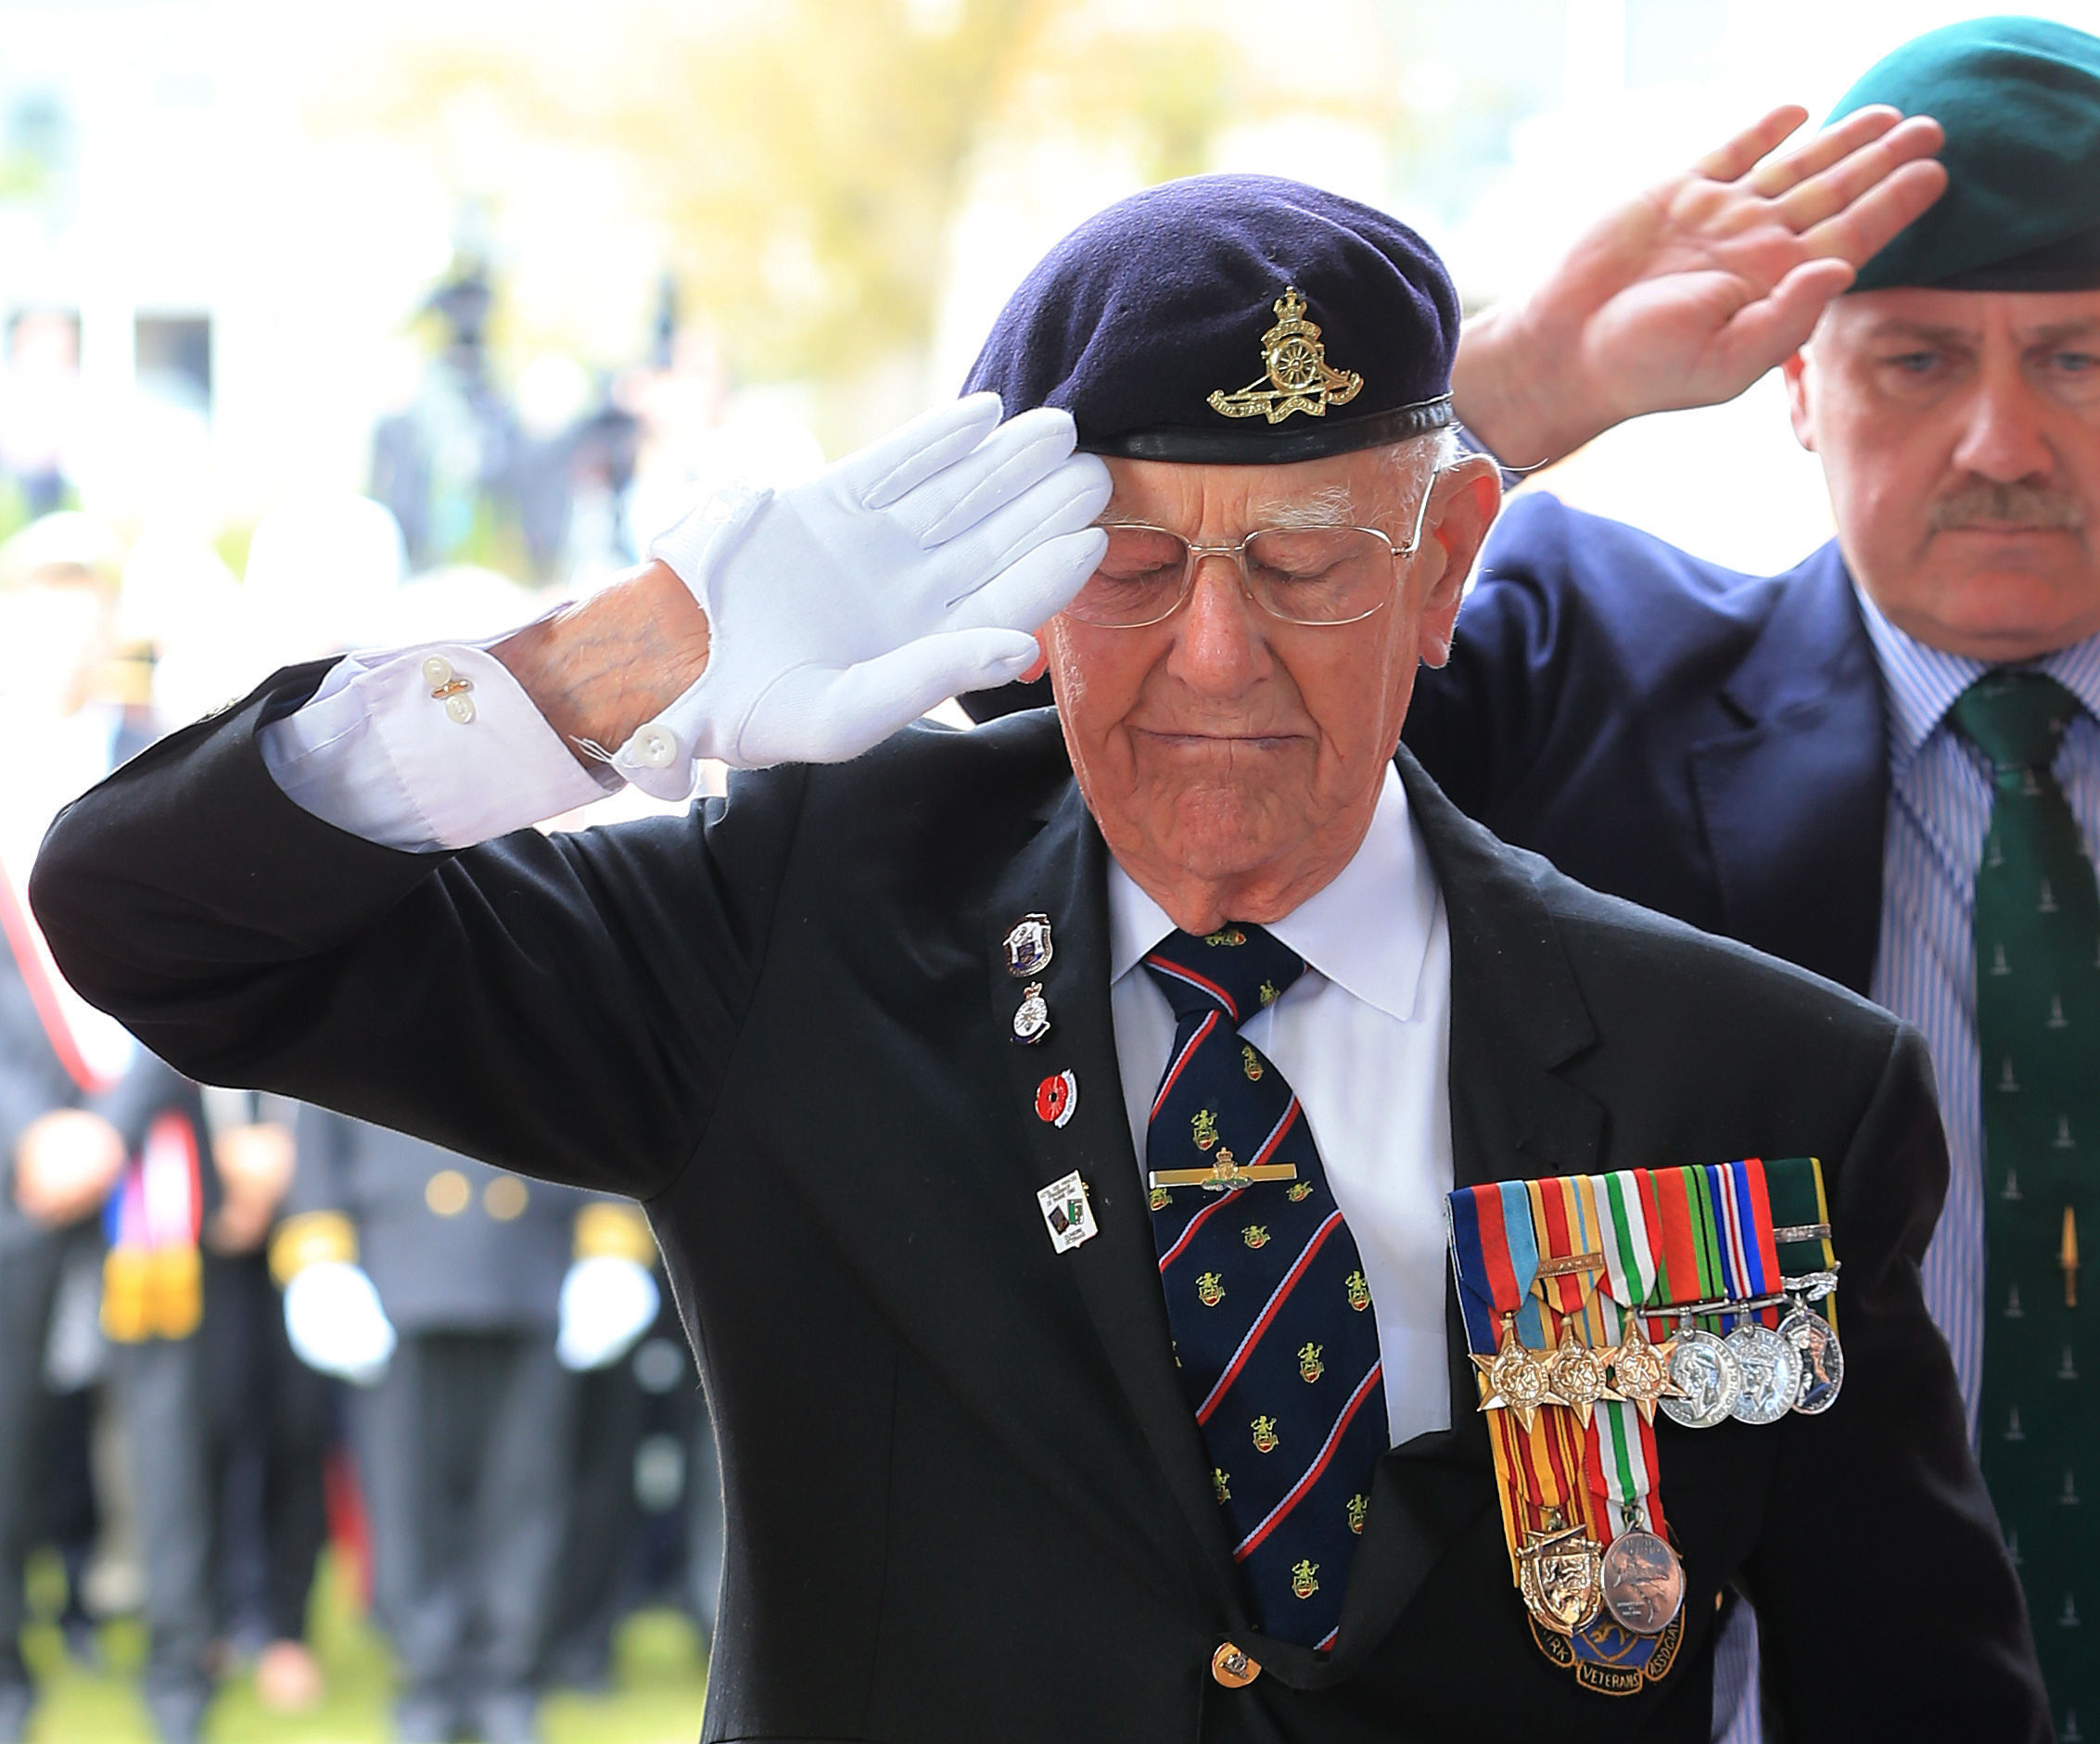 Dunkirk veteran Garth Wright (95) salutes after laying a wreath at the British Memorial in Dunkirk Military Cemetery, France, during a memorial service as part of the 75th anniversary commemorations of Operation Dynamo. (PA)